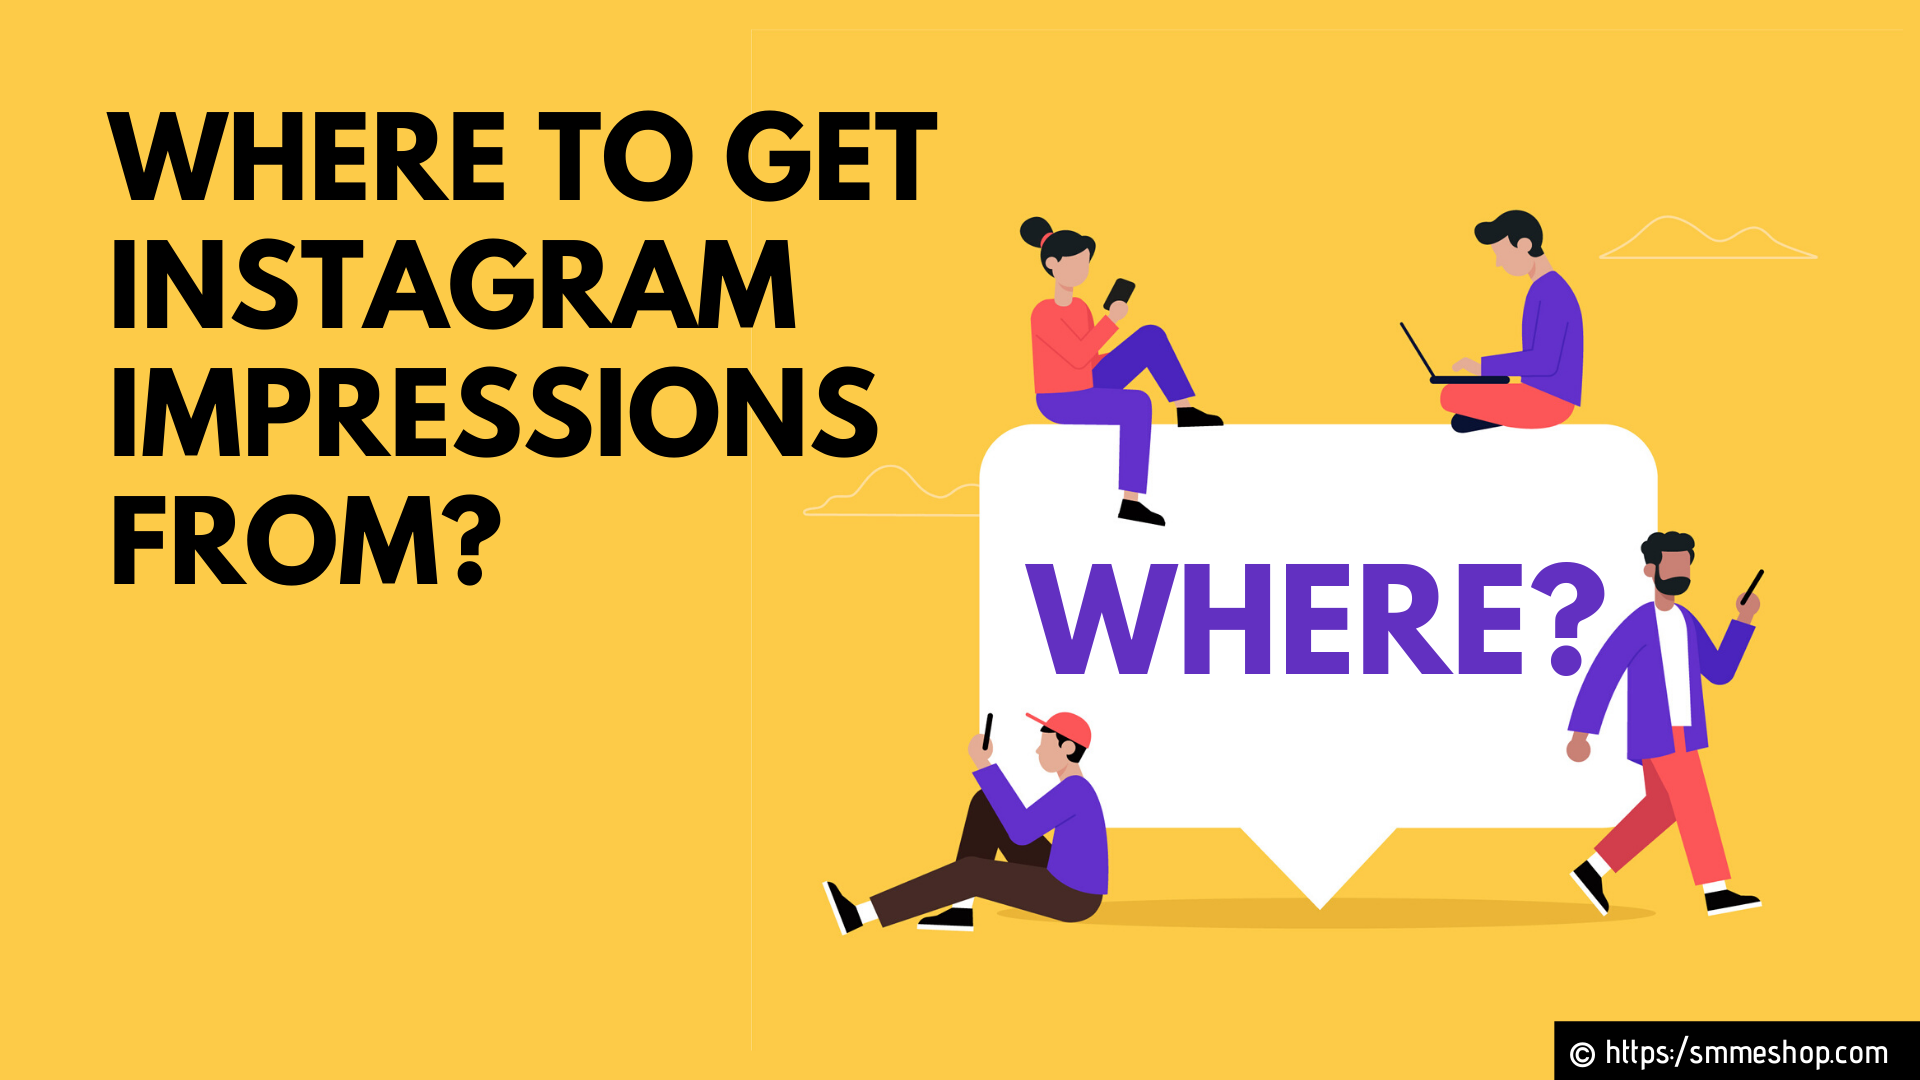 Where To Get Instagram Impressions From?